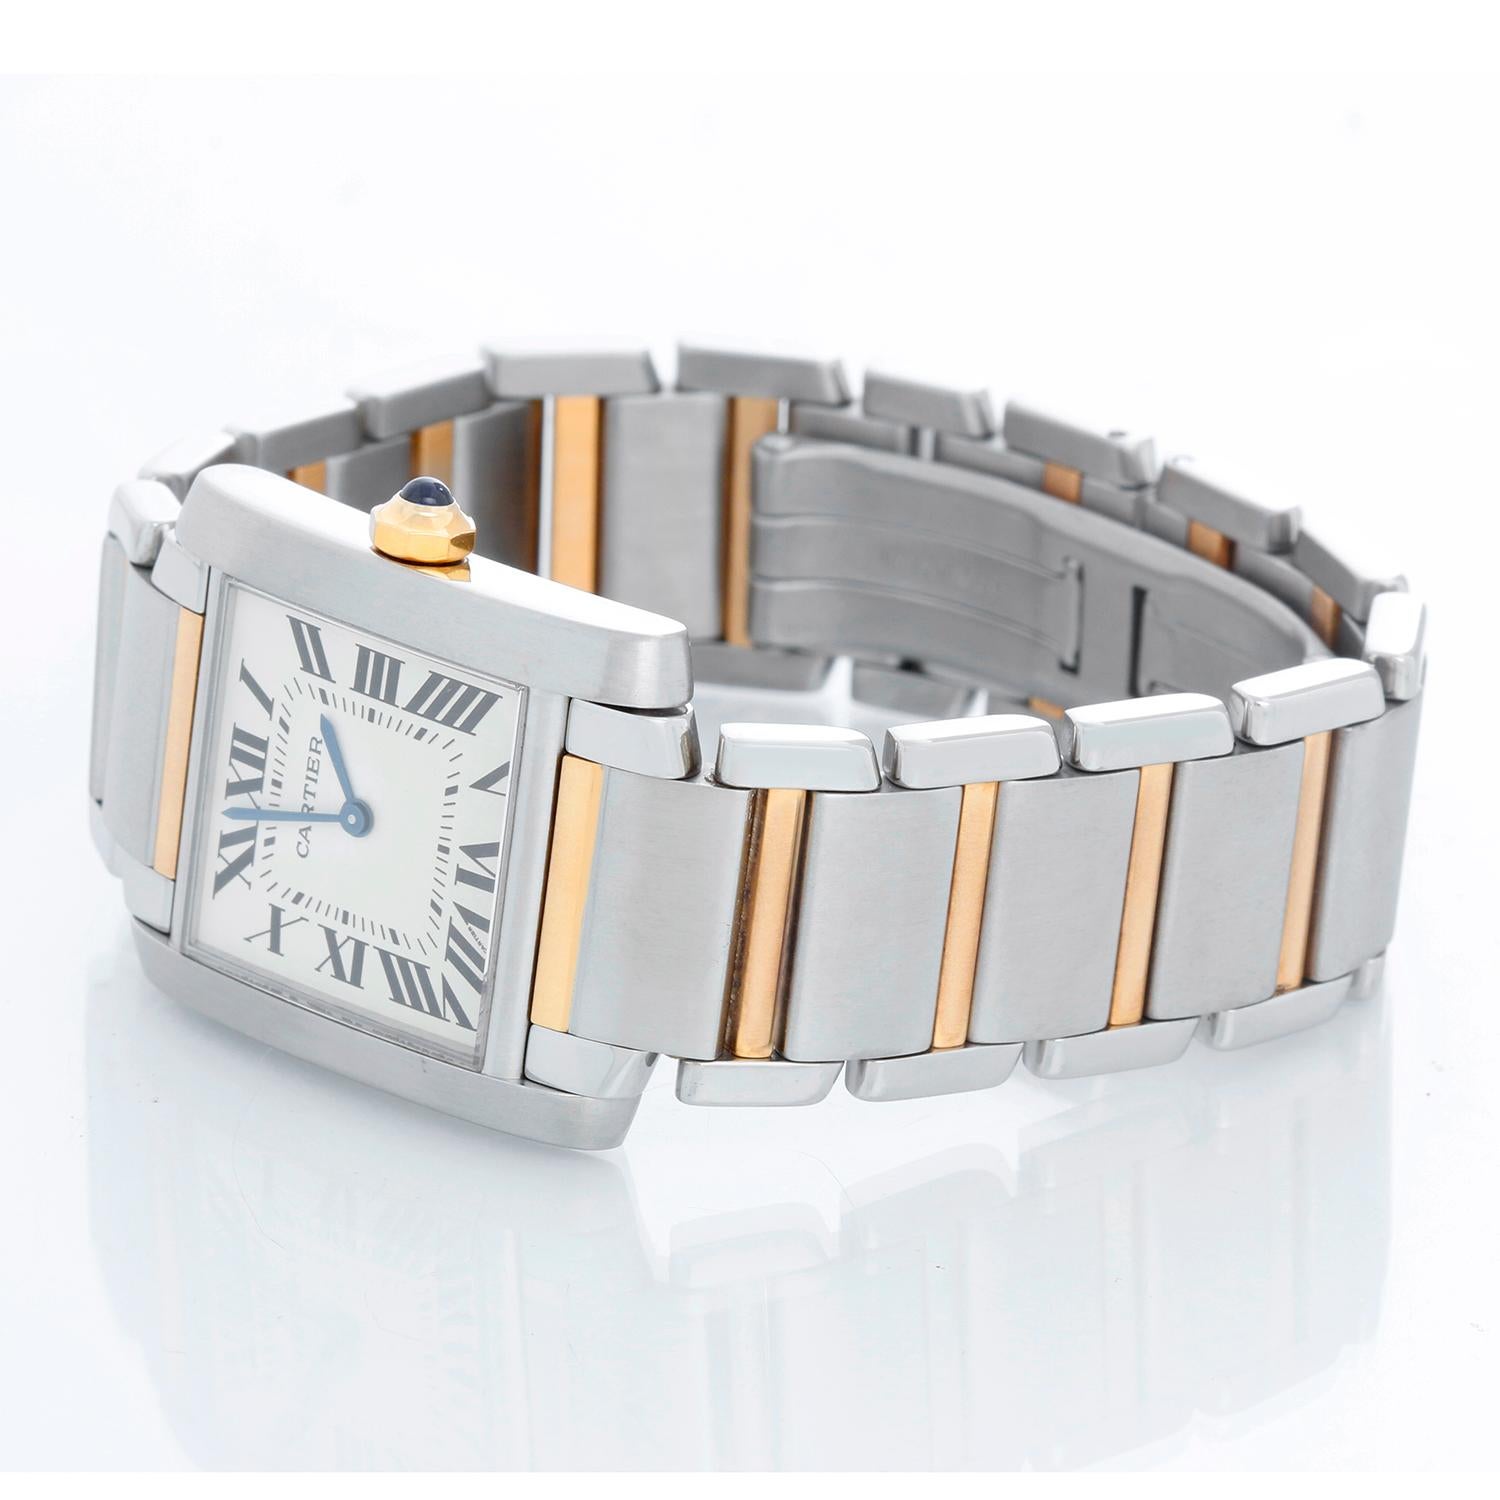 Cartier Tank Francaise Midsize 2-Tone Steel & Gold Watch W51006Q4 - Quartz. Stainless steel and yellow gold case  (25mm x 30mm). Ivory colored dial with black Roman numerals. Stainless steel and yellow gold Cartier bracelet with deployant clasp.